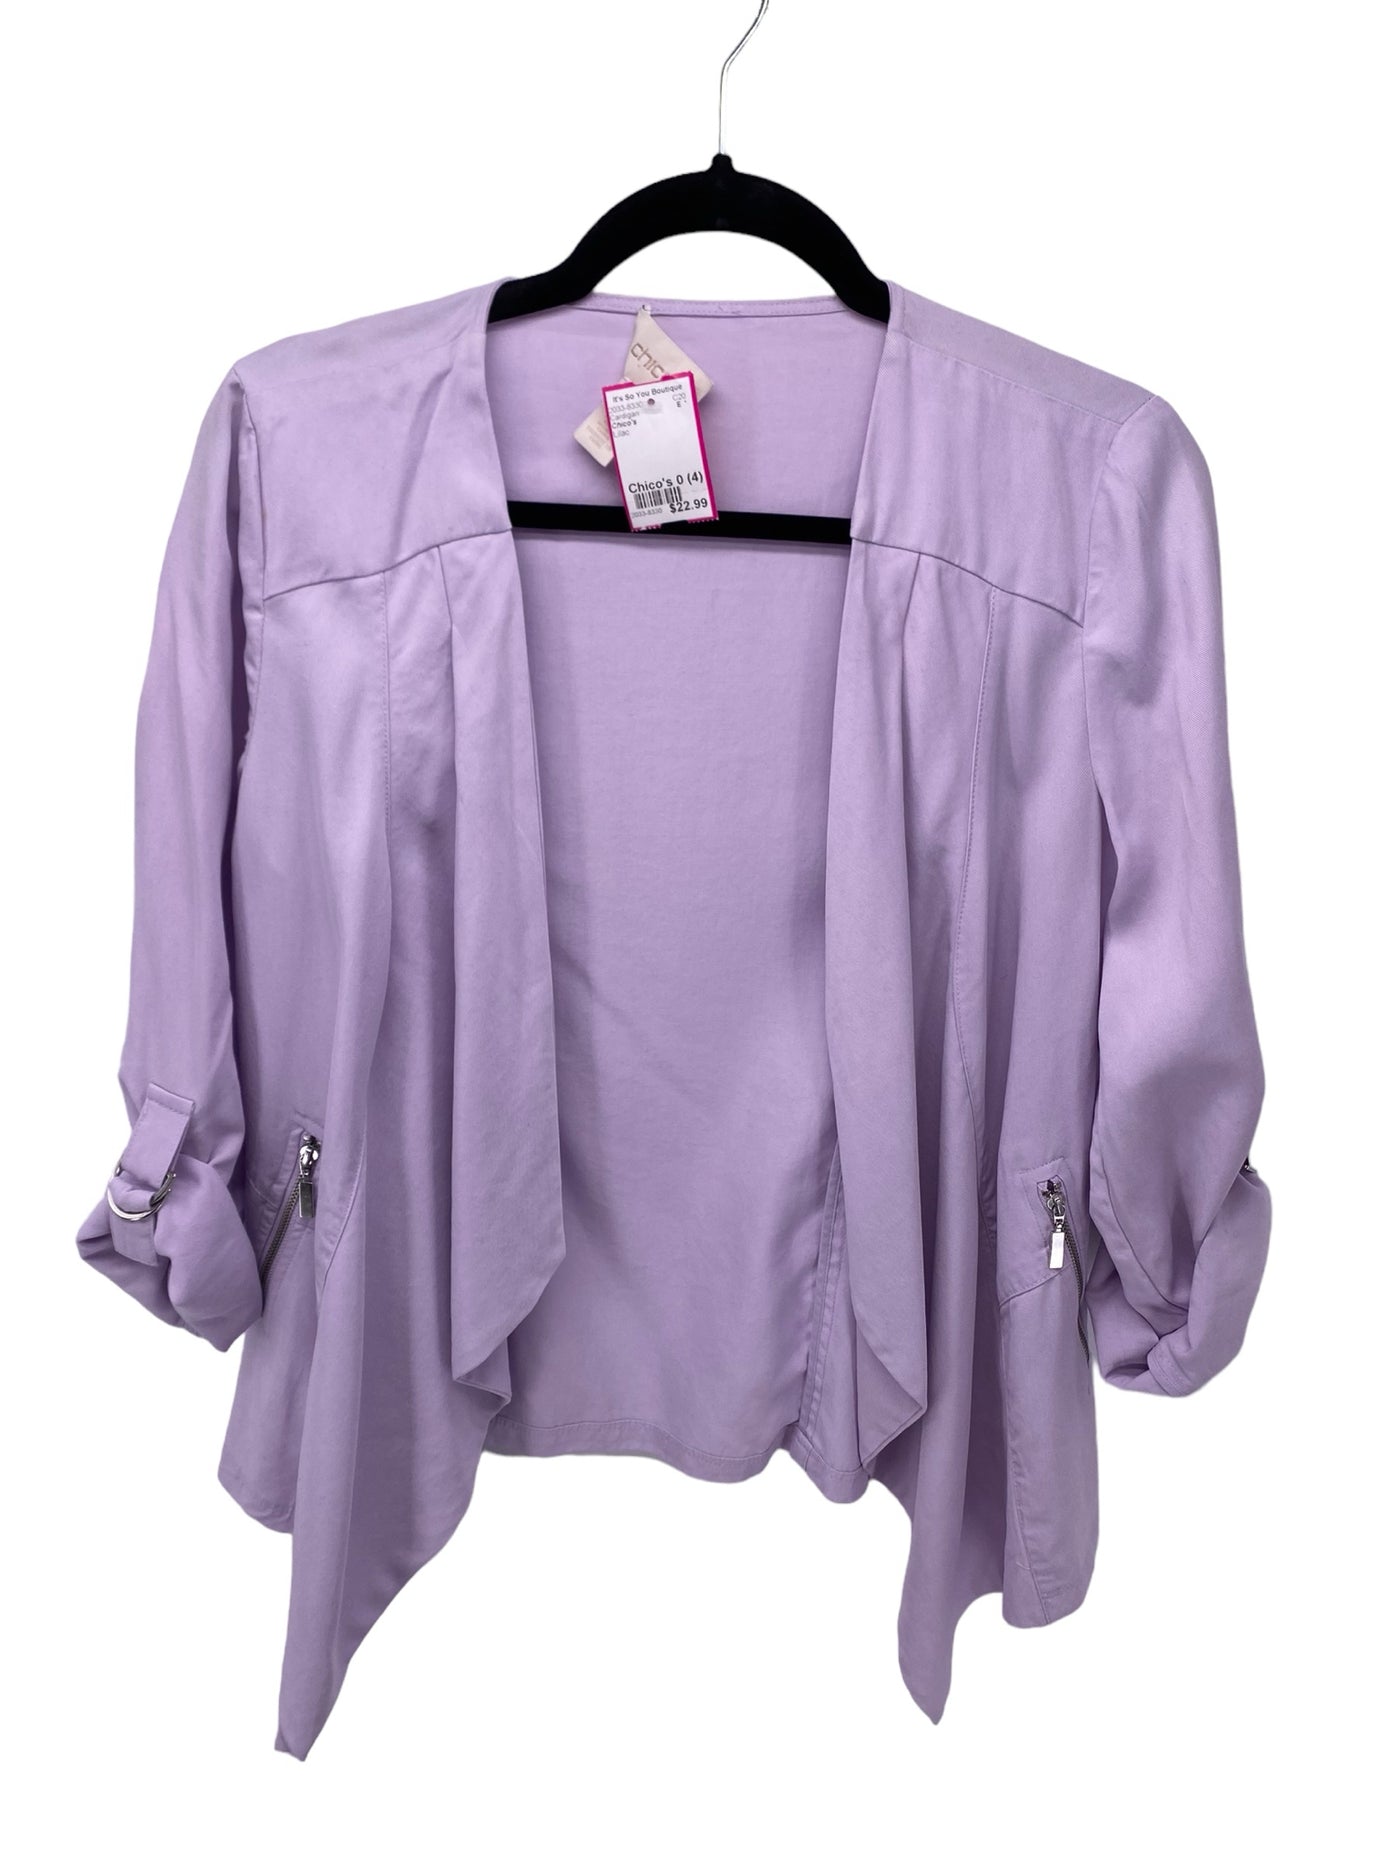 Chico's Misses Size Chico's 0 (4) Lilac Cardigan